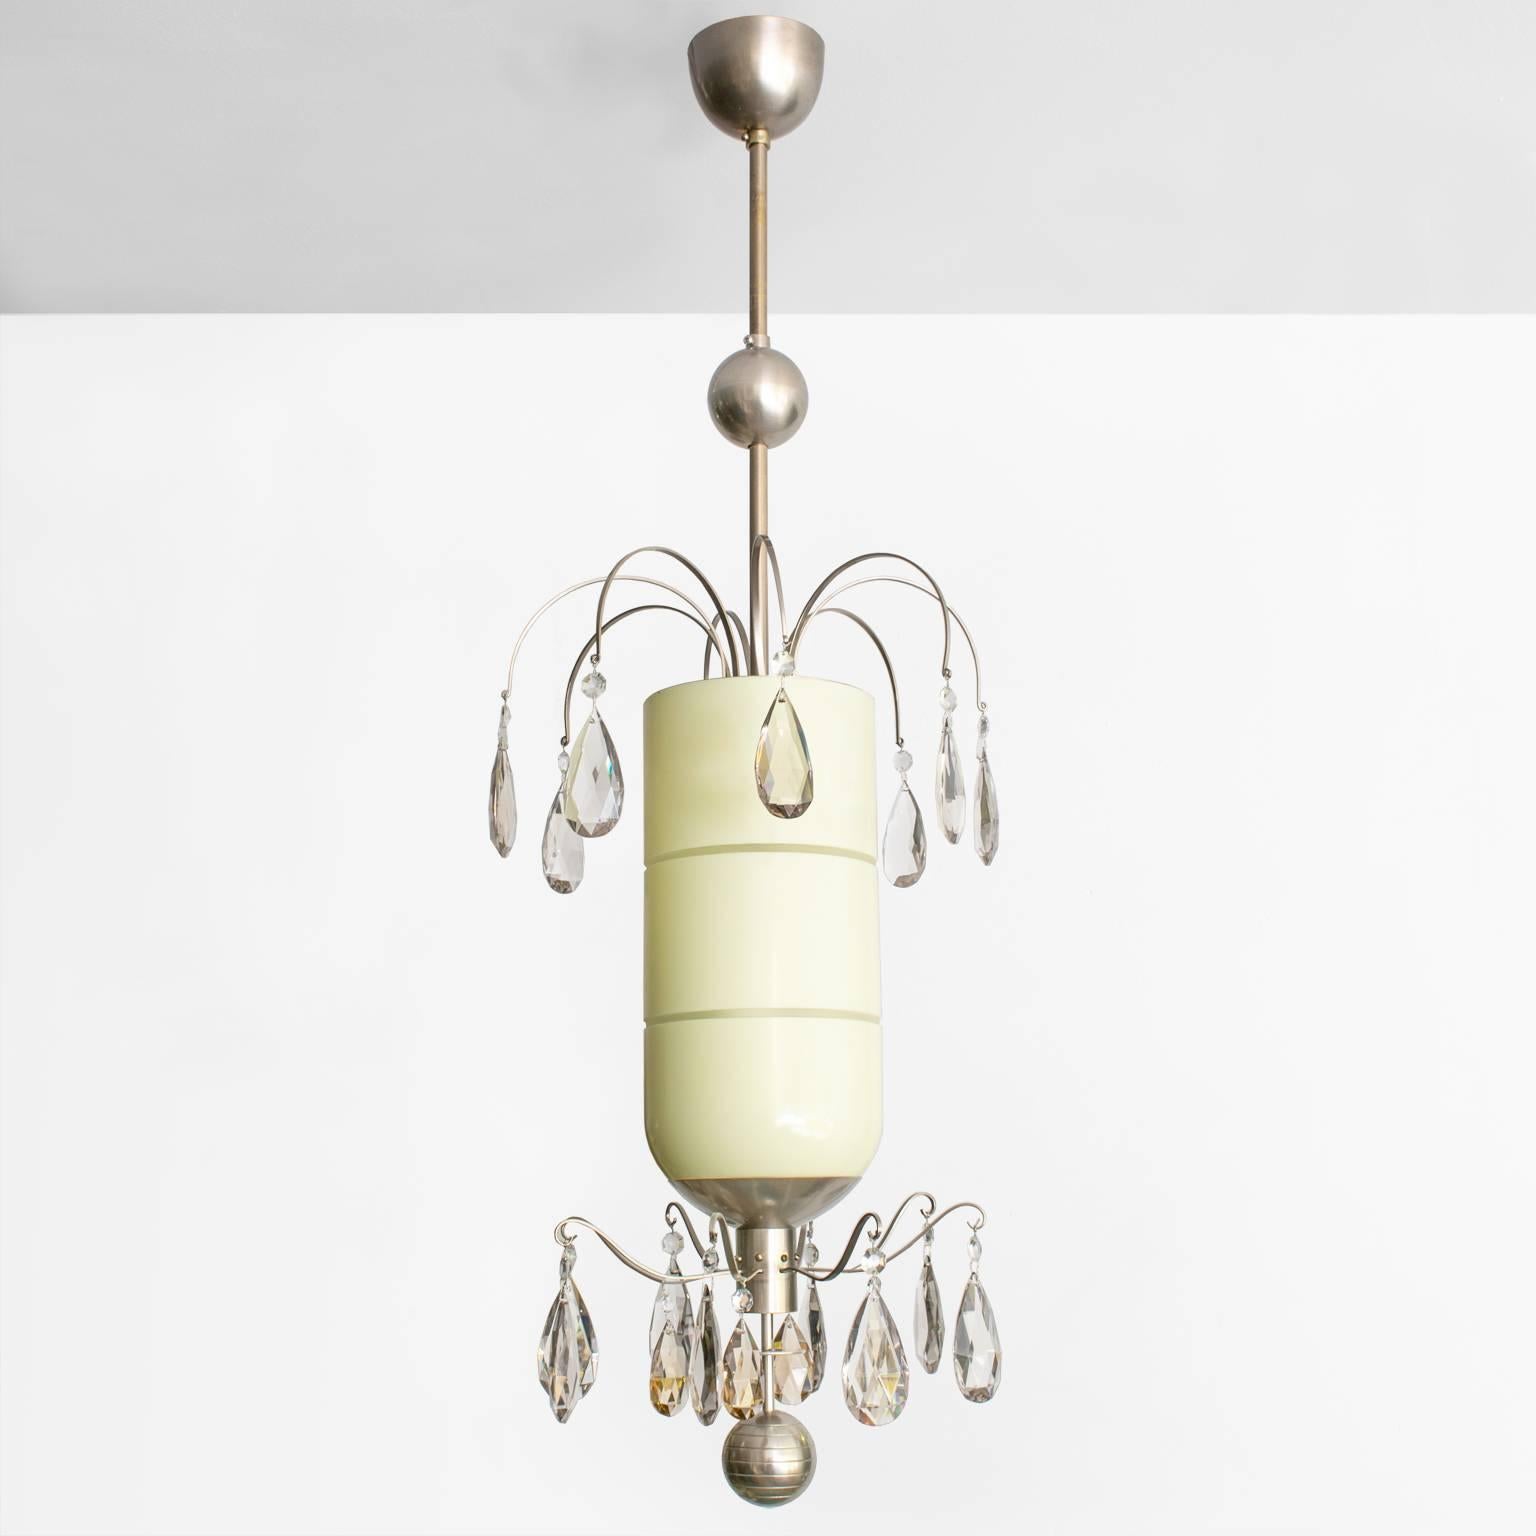 Swedish Art Deco pendant by Bohlmarks with two tiers of faceted crystal surrounding a capsule shaped modernist cased glass shade with horizontal etched grooves. The brass metal structure is plated with nickel from canopy to finial. Newly restored,